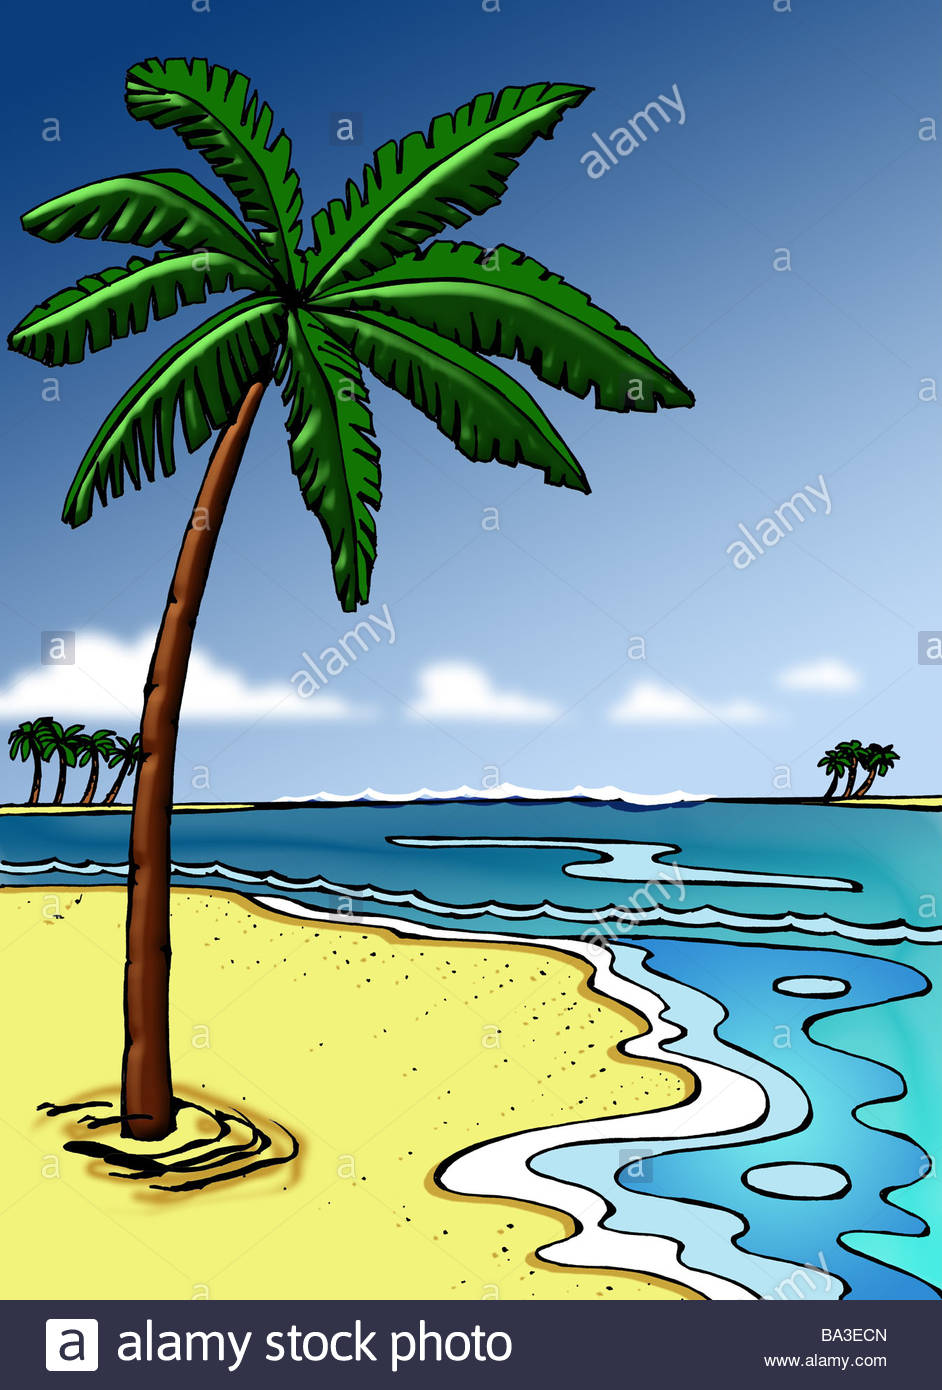 Palm Tree Beach Drawing at GetDrawings | Free download